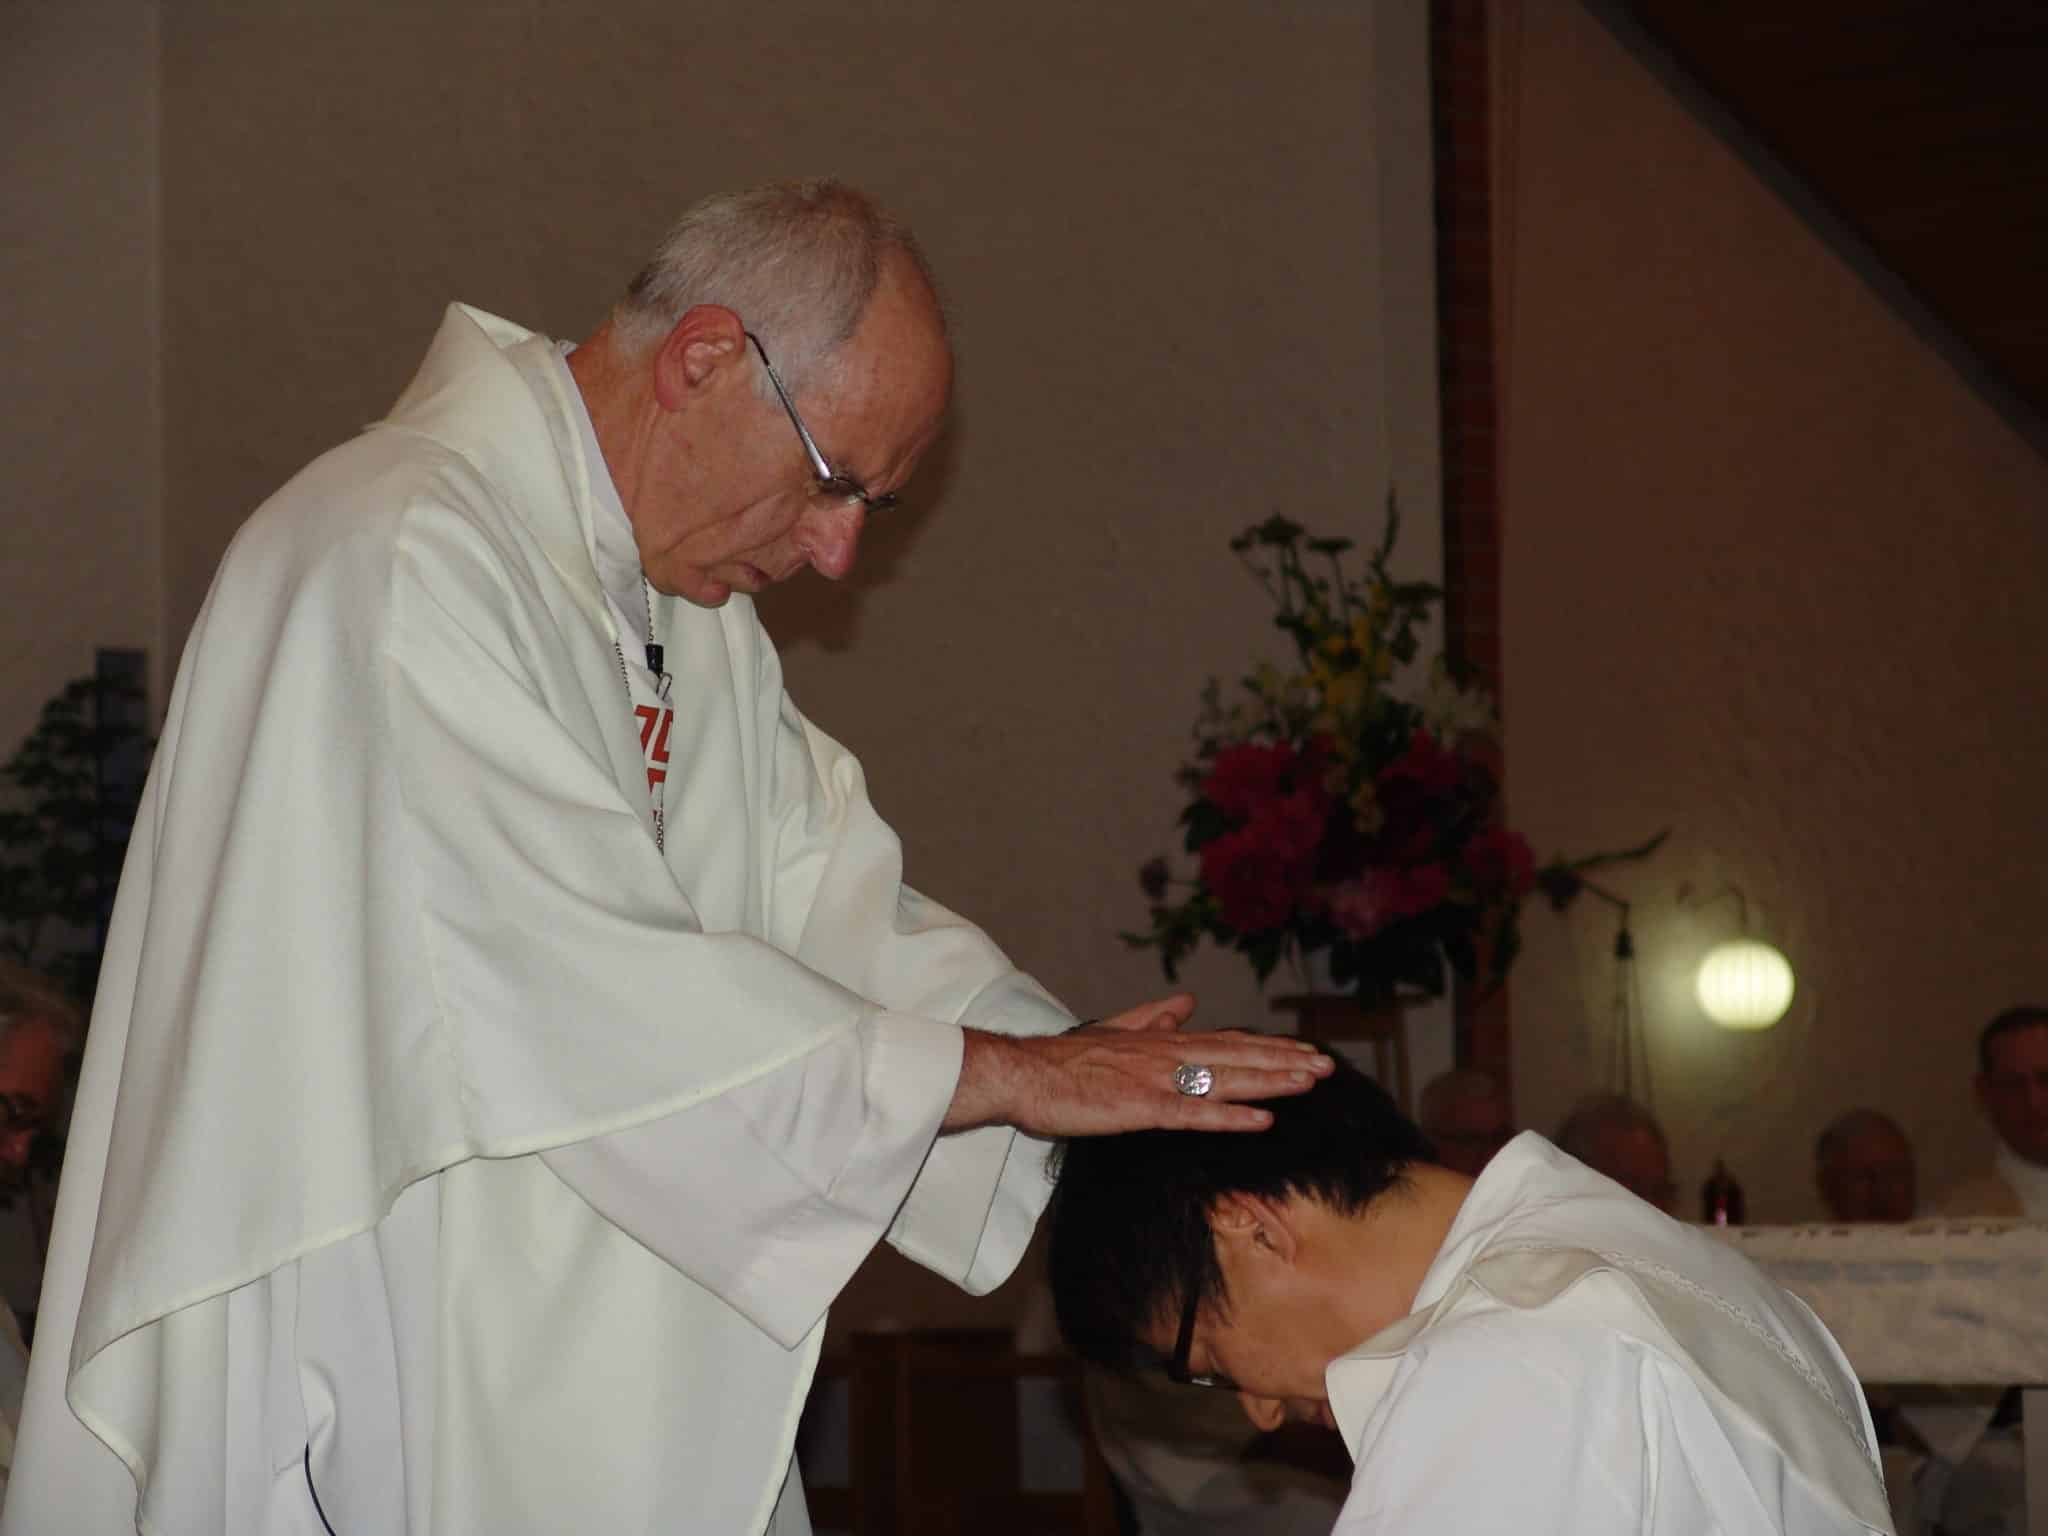 New priest ordained for Dunedin diocese